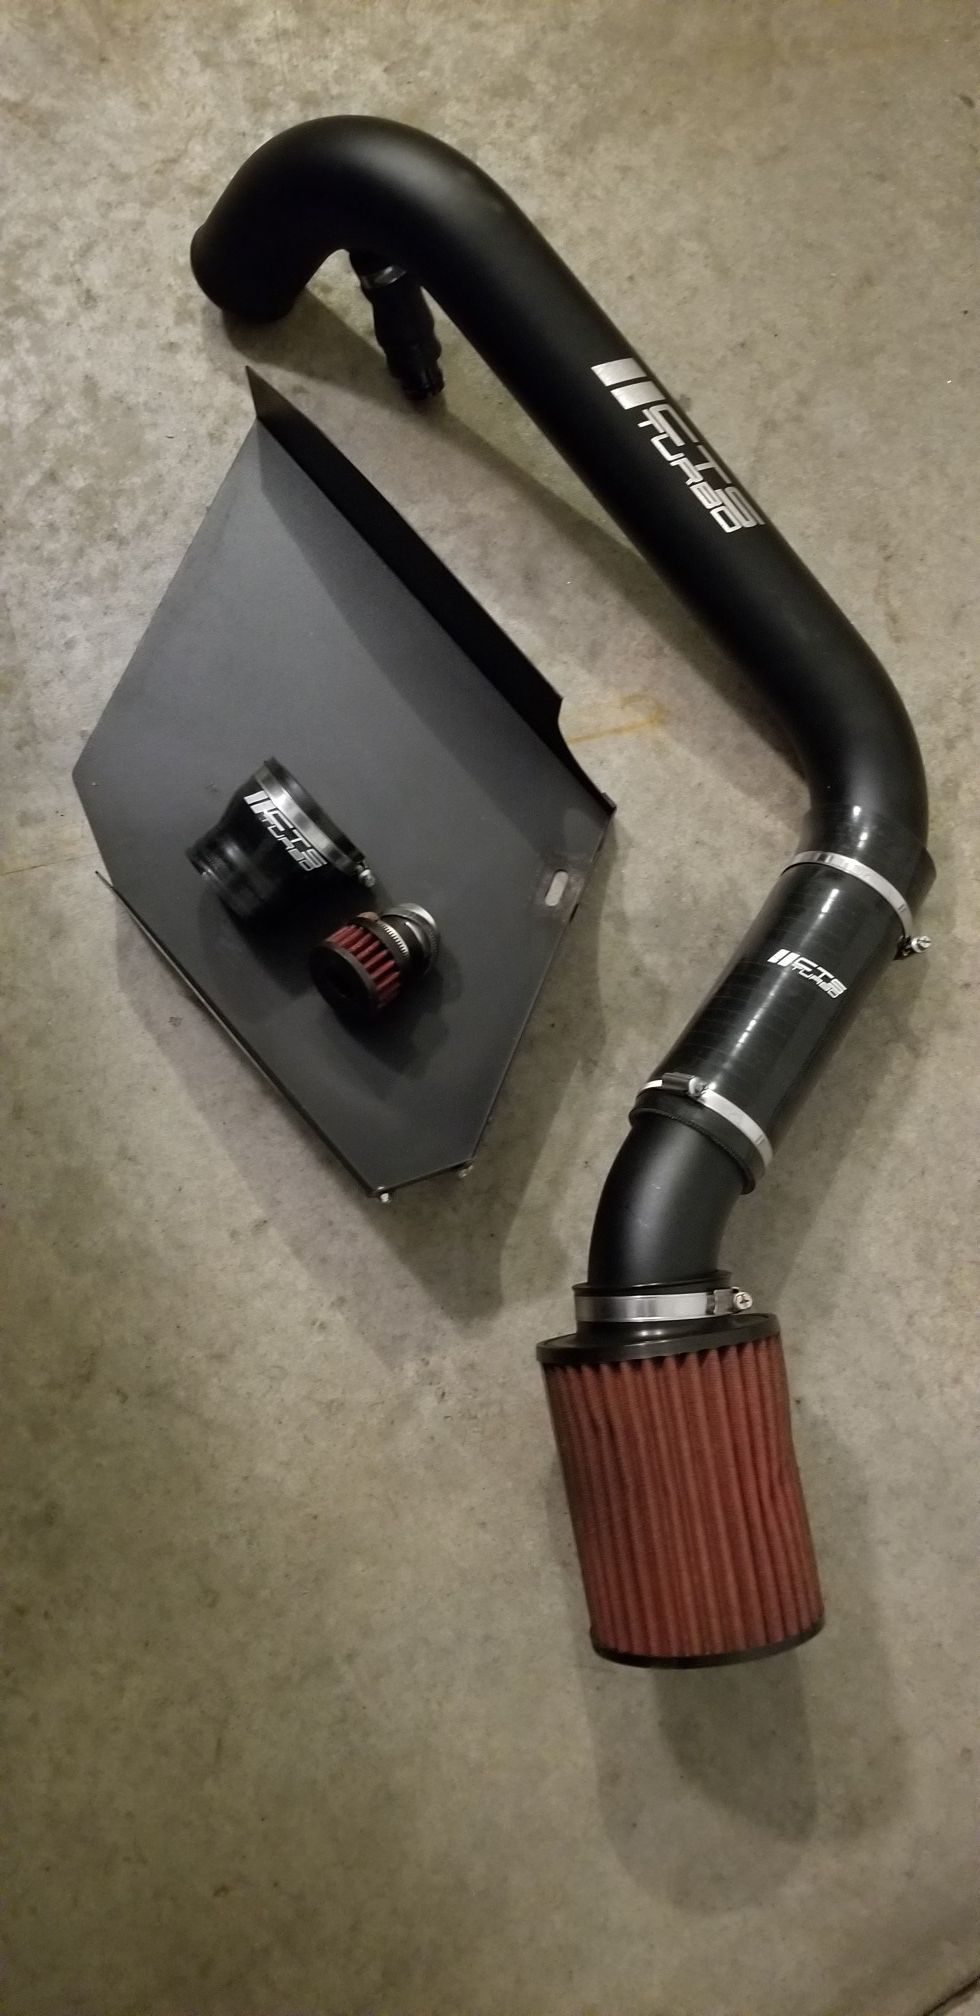 CTS turbo VW 1.8t 2.0t cold air intake